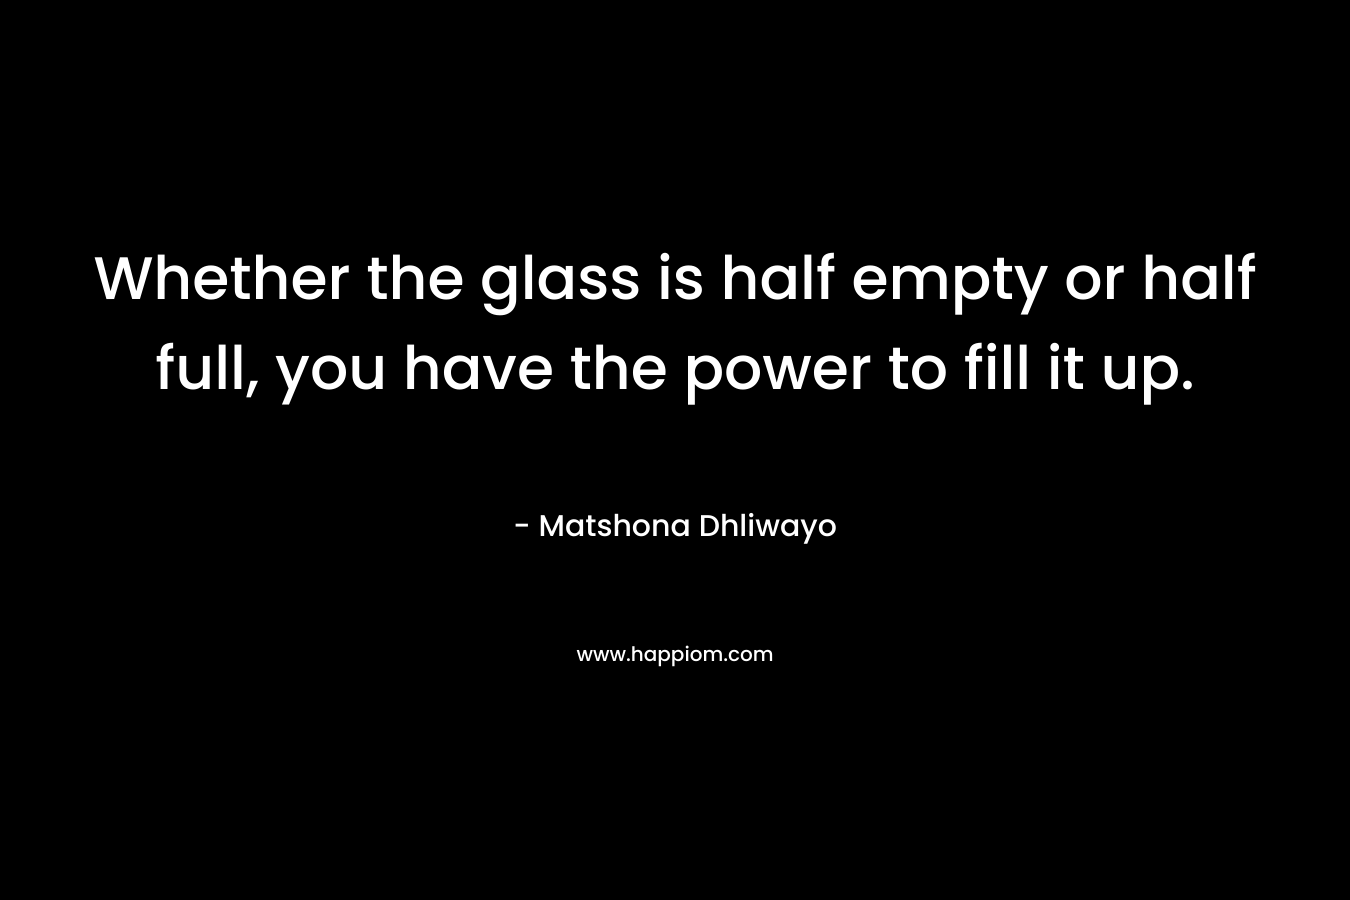 Whether the glass is half empty or half full, you have the power to fill it up.